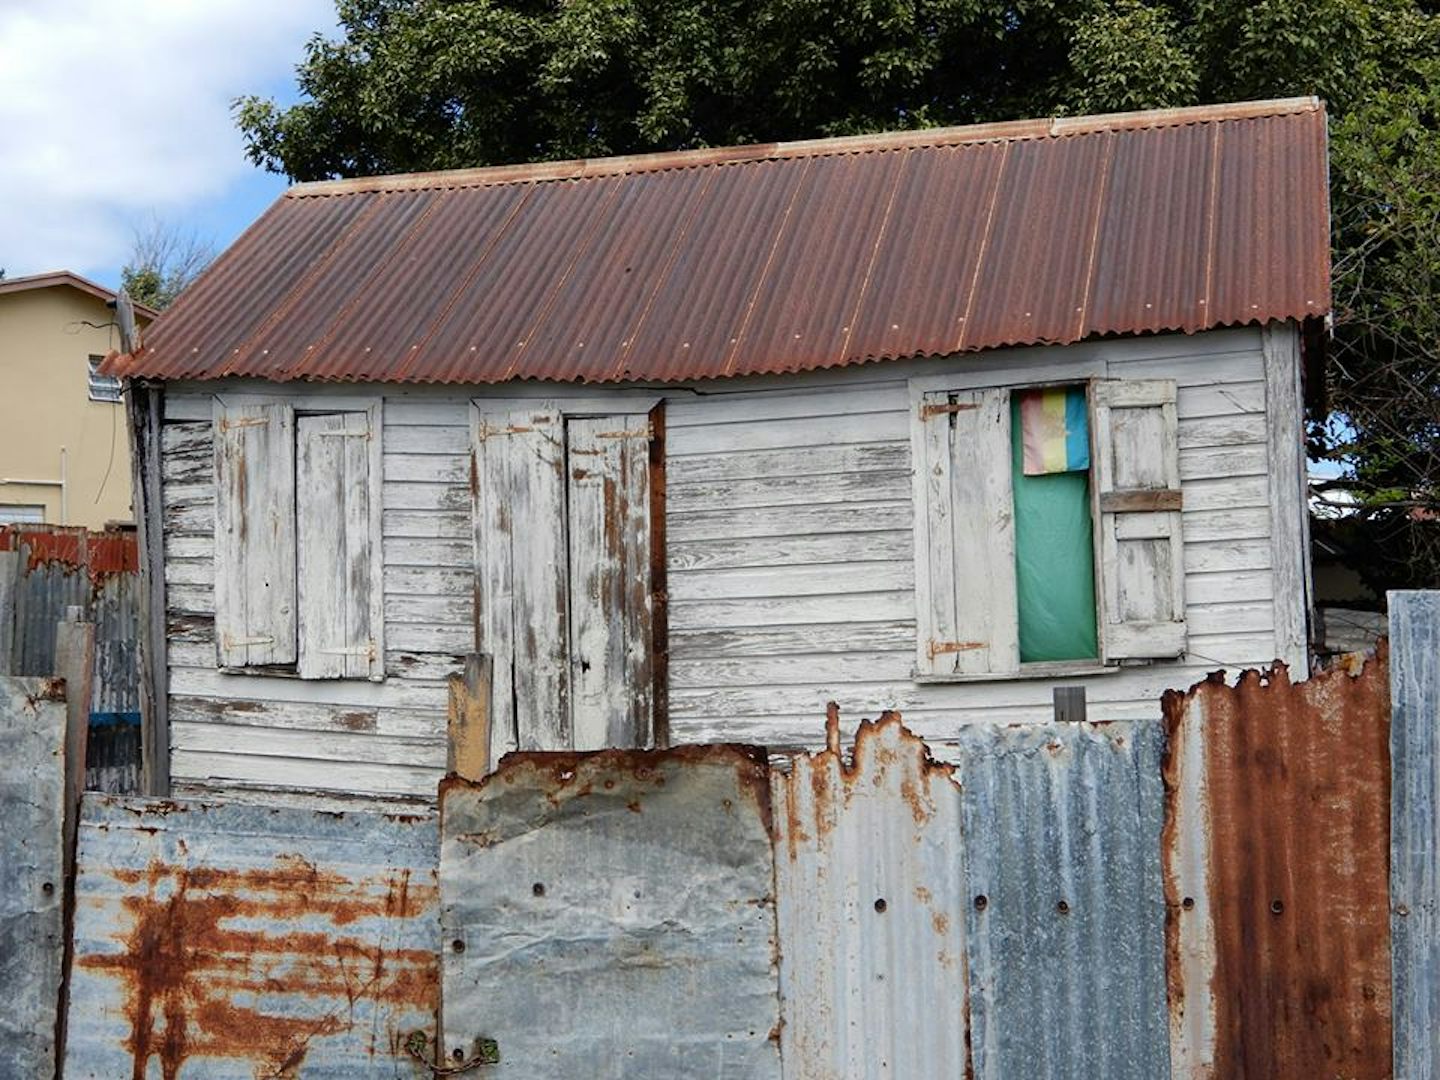 Old home, St. Kitts 4x4 tour.